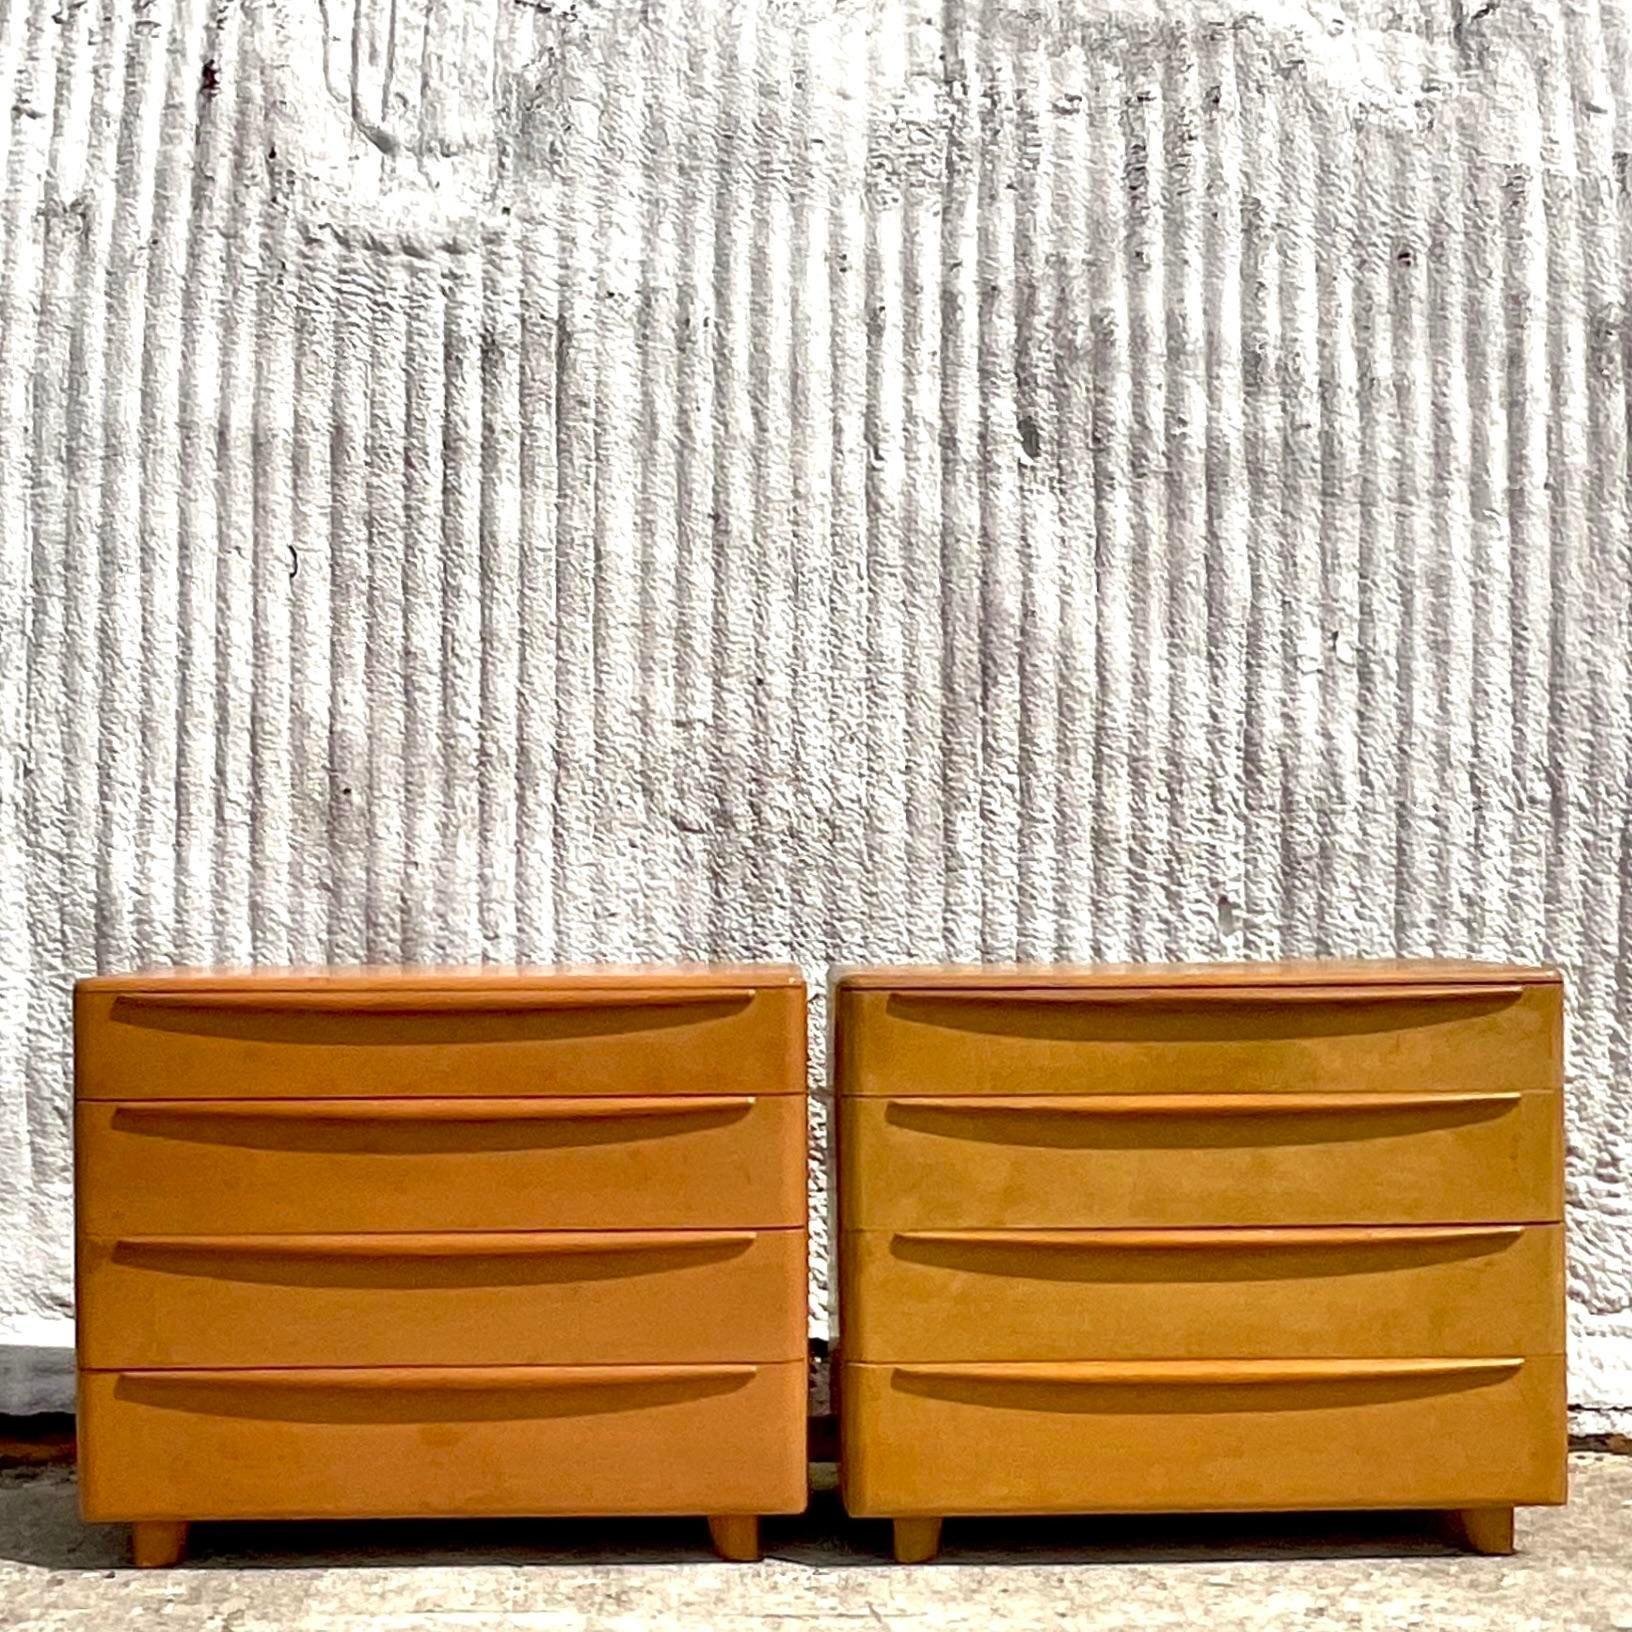 Maple Mid 20th Century Vintage Heywood Wakefield Chest Air Drawers - a Pair For Sale